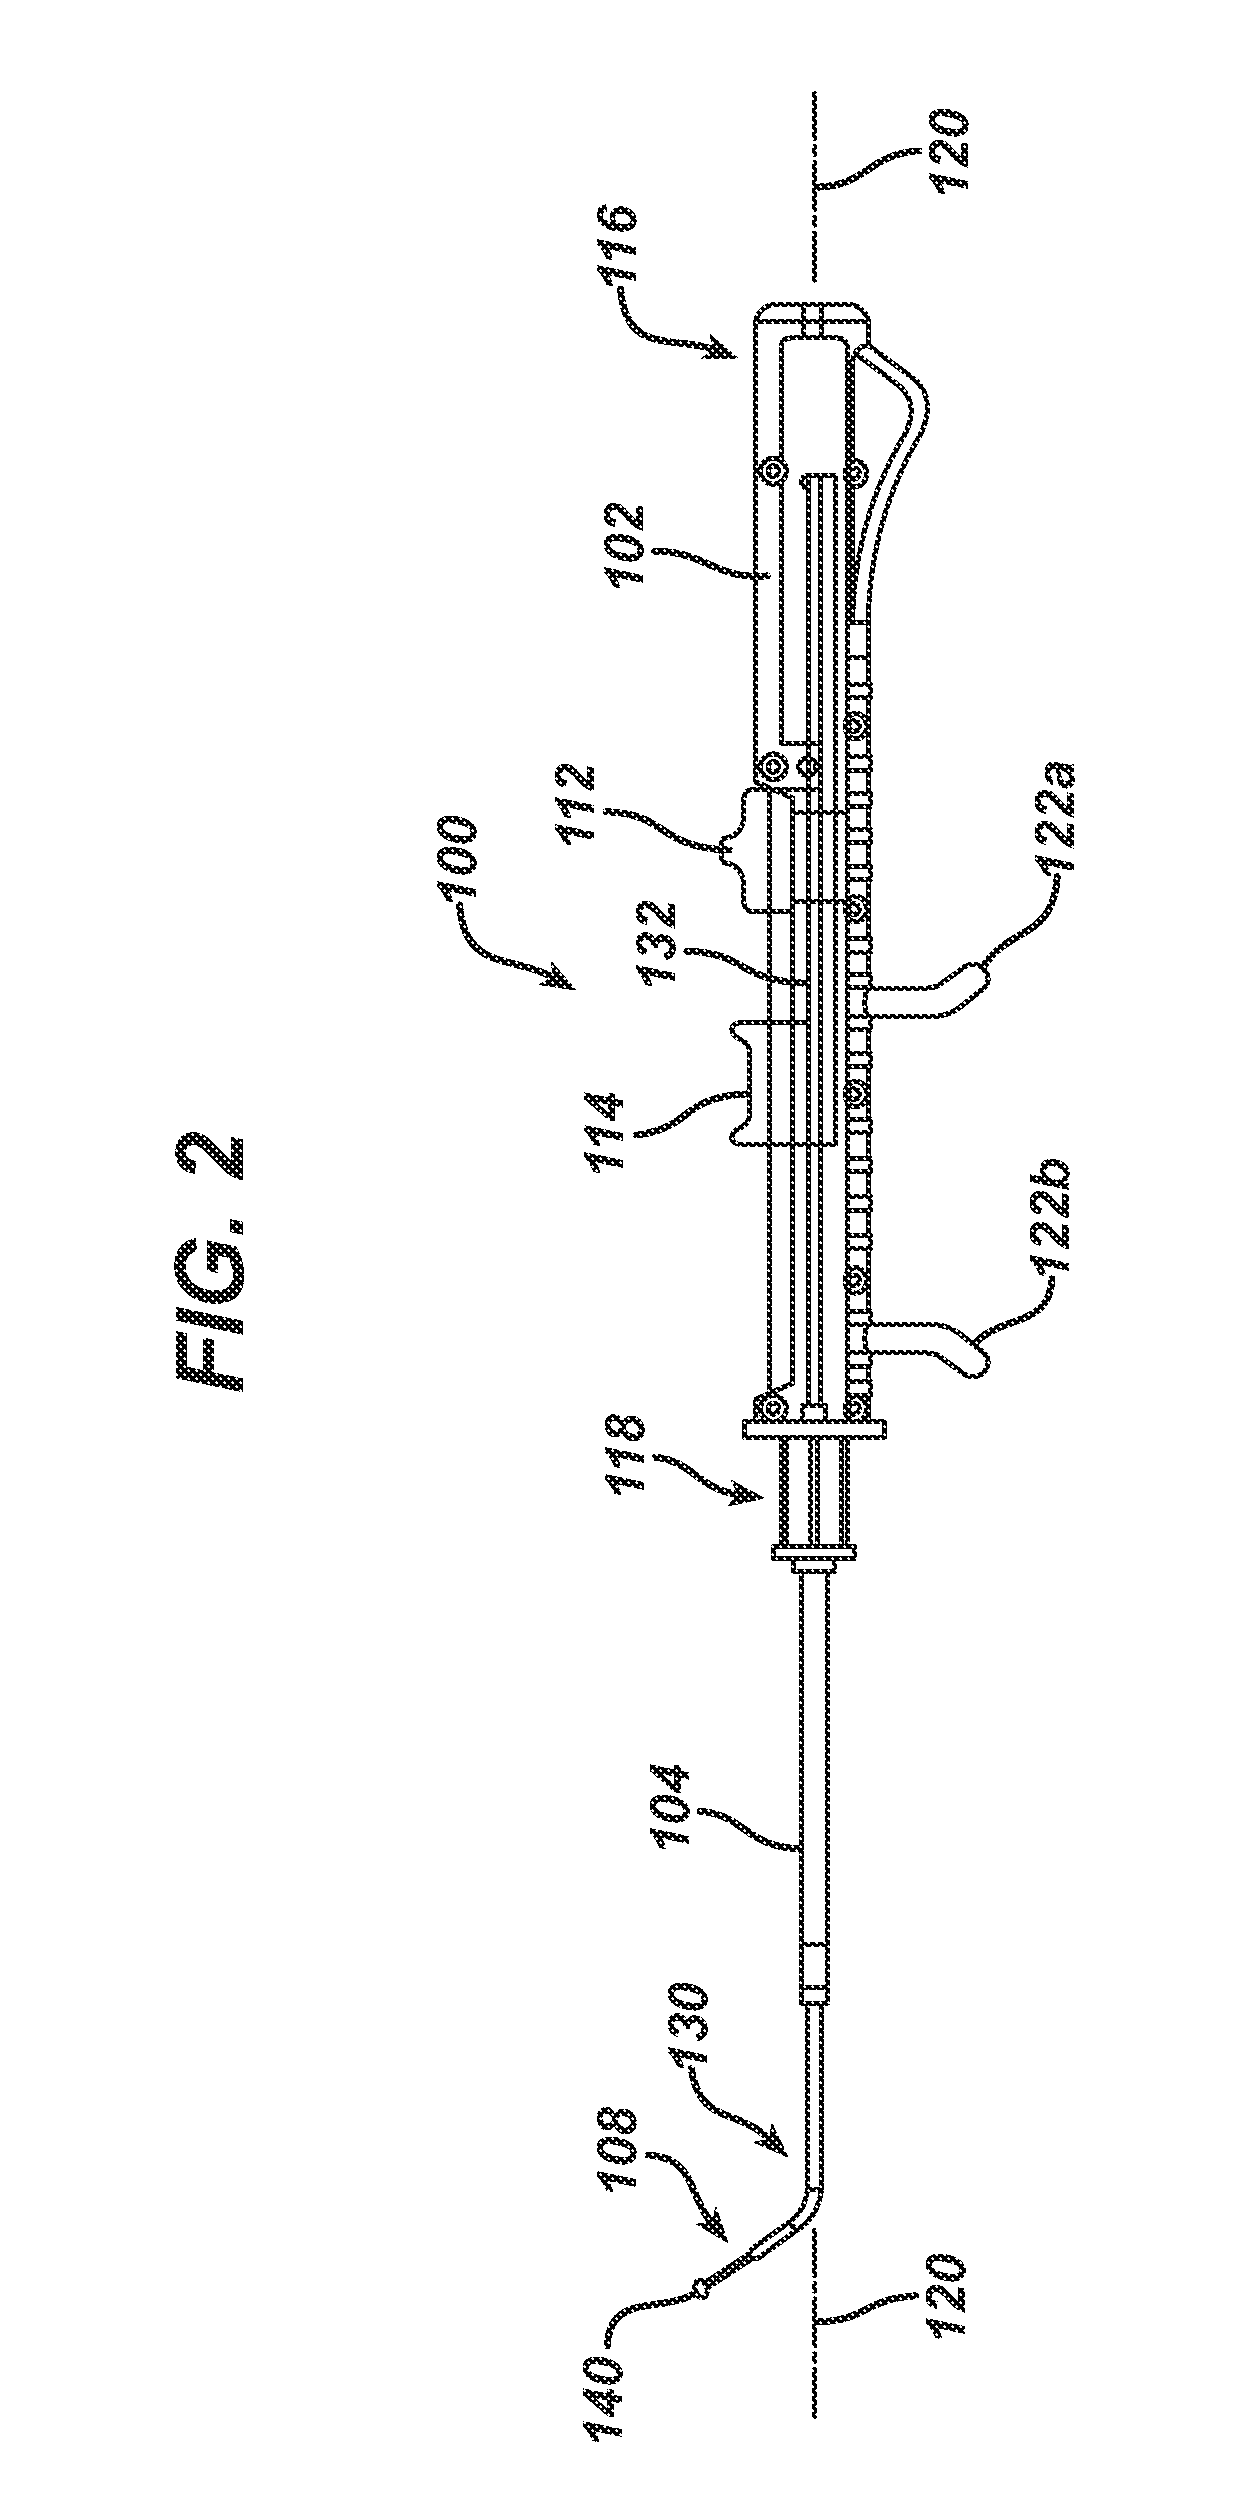 Methods and apparatus for treating disorders of the sinuses